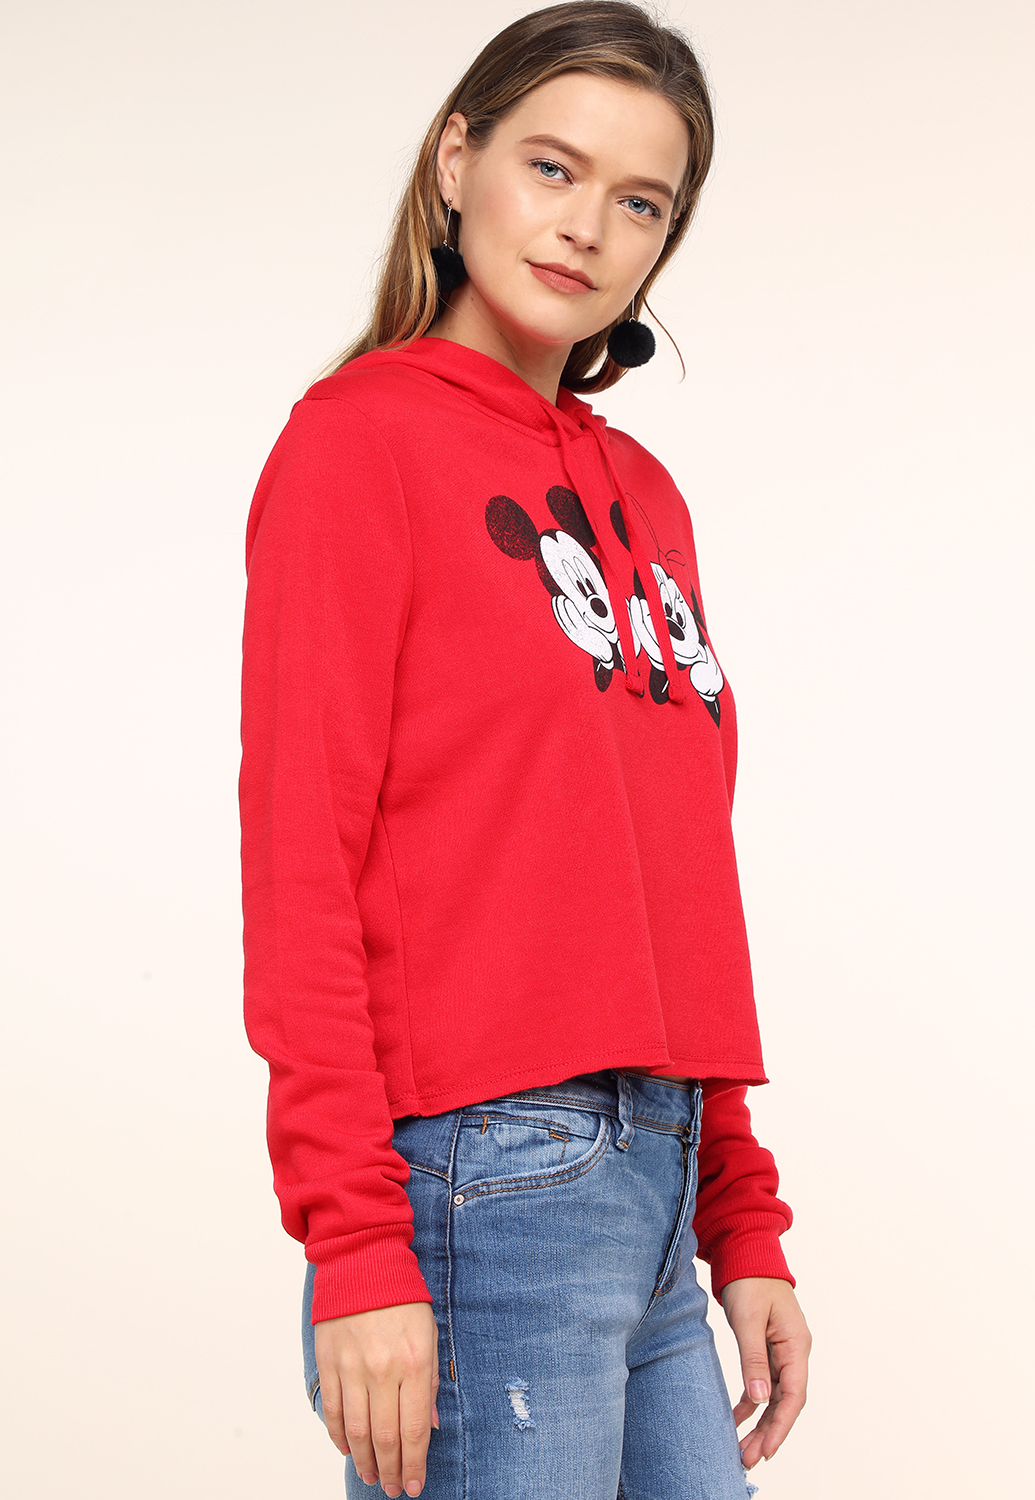 Mickey And Minnie Graphic Hoodie